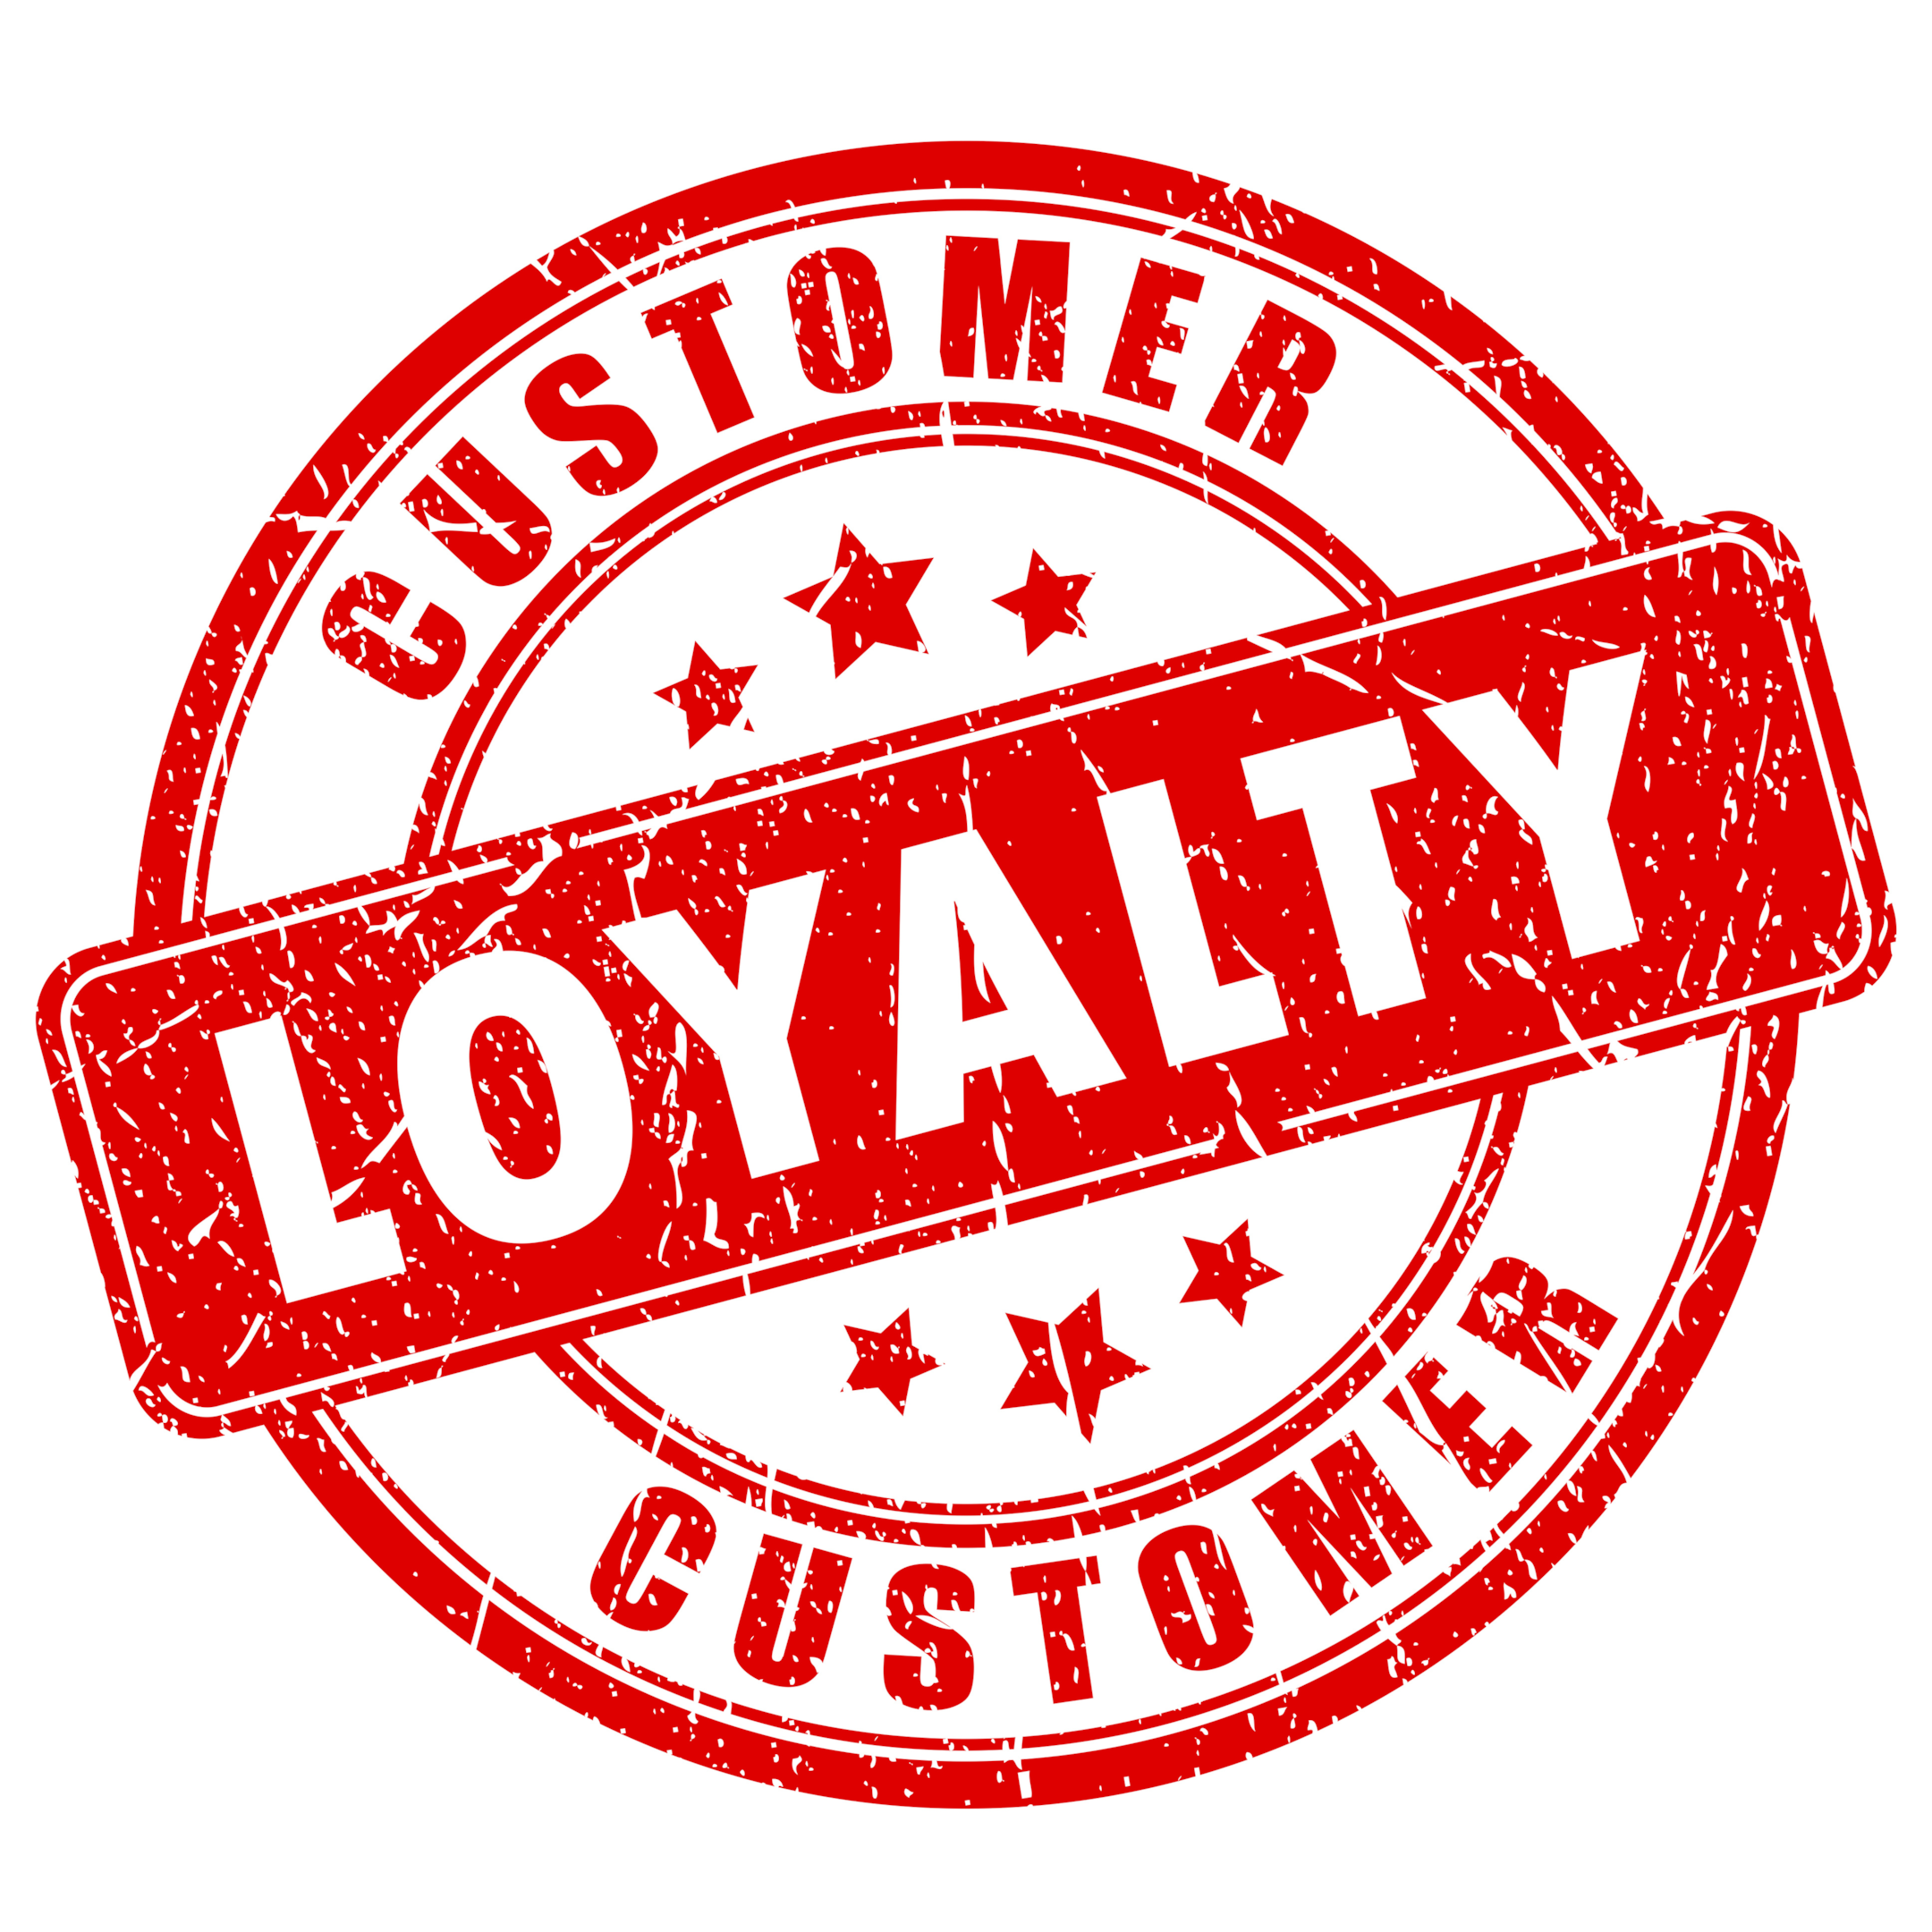 Join our loyalty program by making an account. The loyalty program allows you to collect points and rewards that you can redeem and spend on any purchase. This is for members only, so be sure to join our loyalty program today!